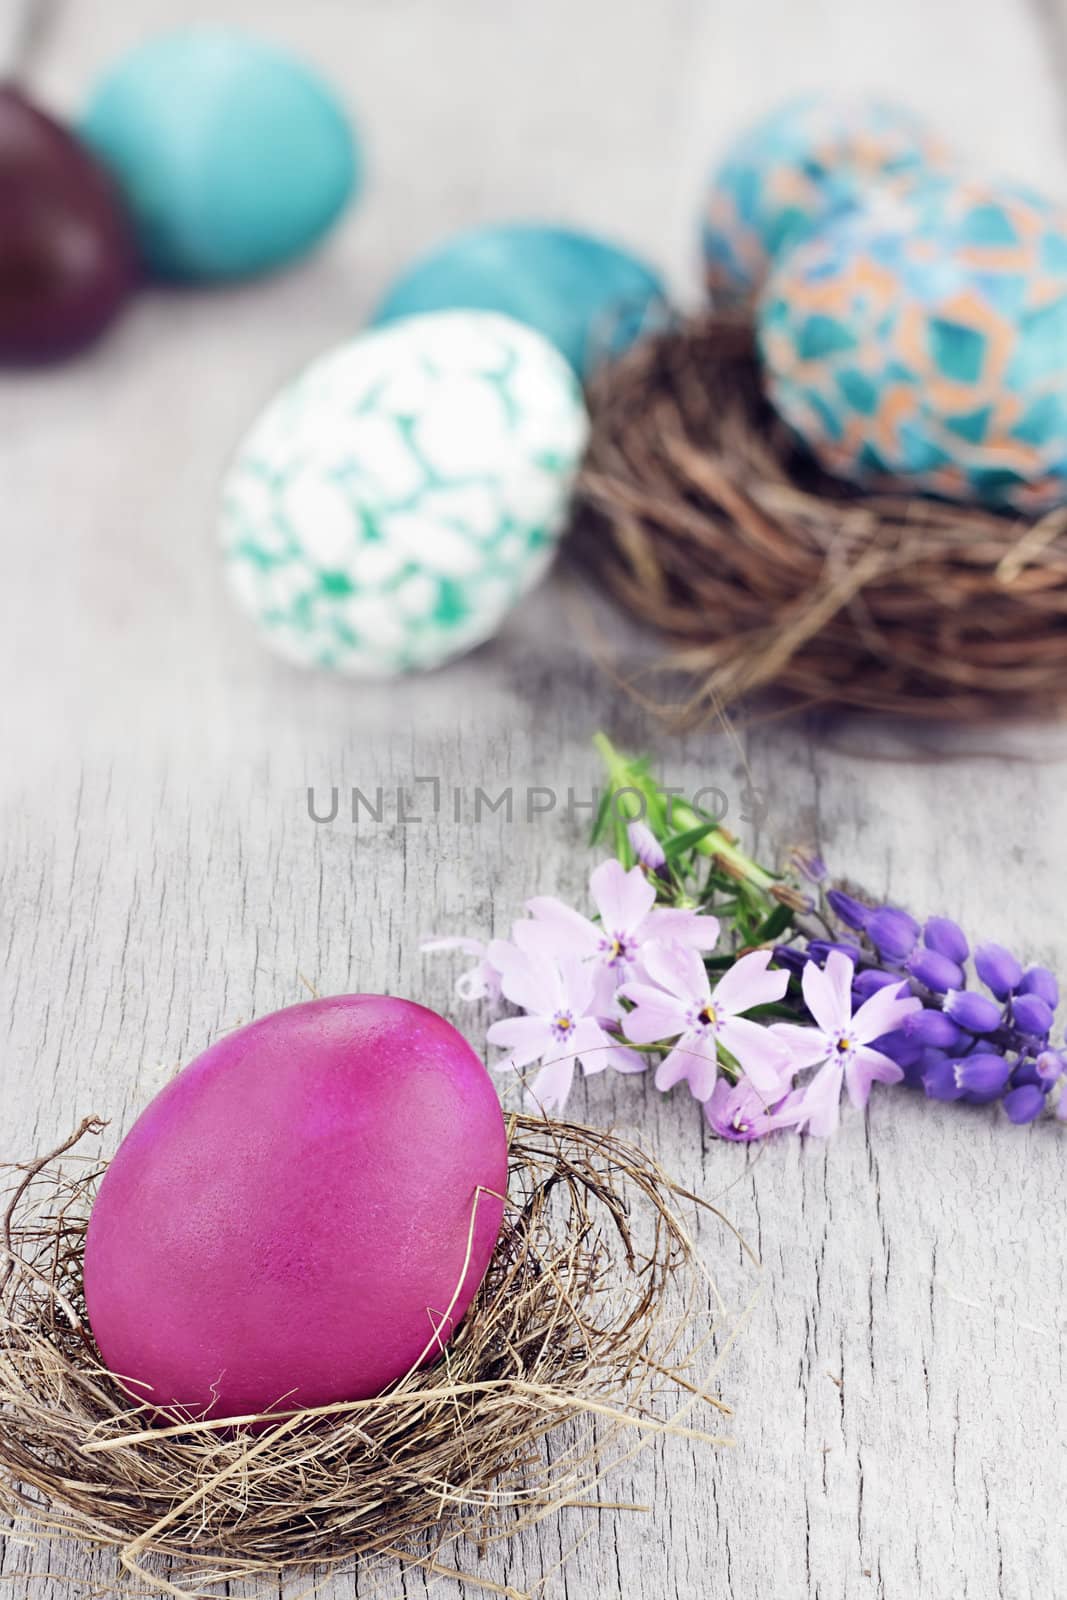 Beautiful Easter egg in a small nest with spring flowers and more eggs in background. Selective focus on egg in foreground.
